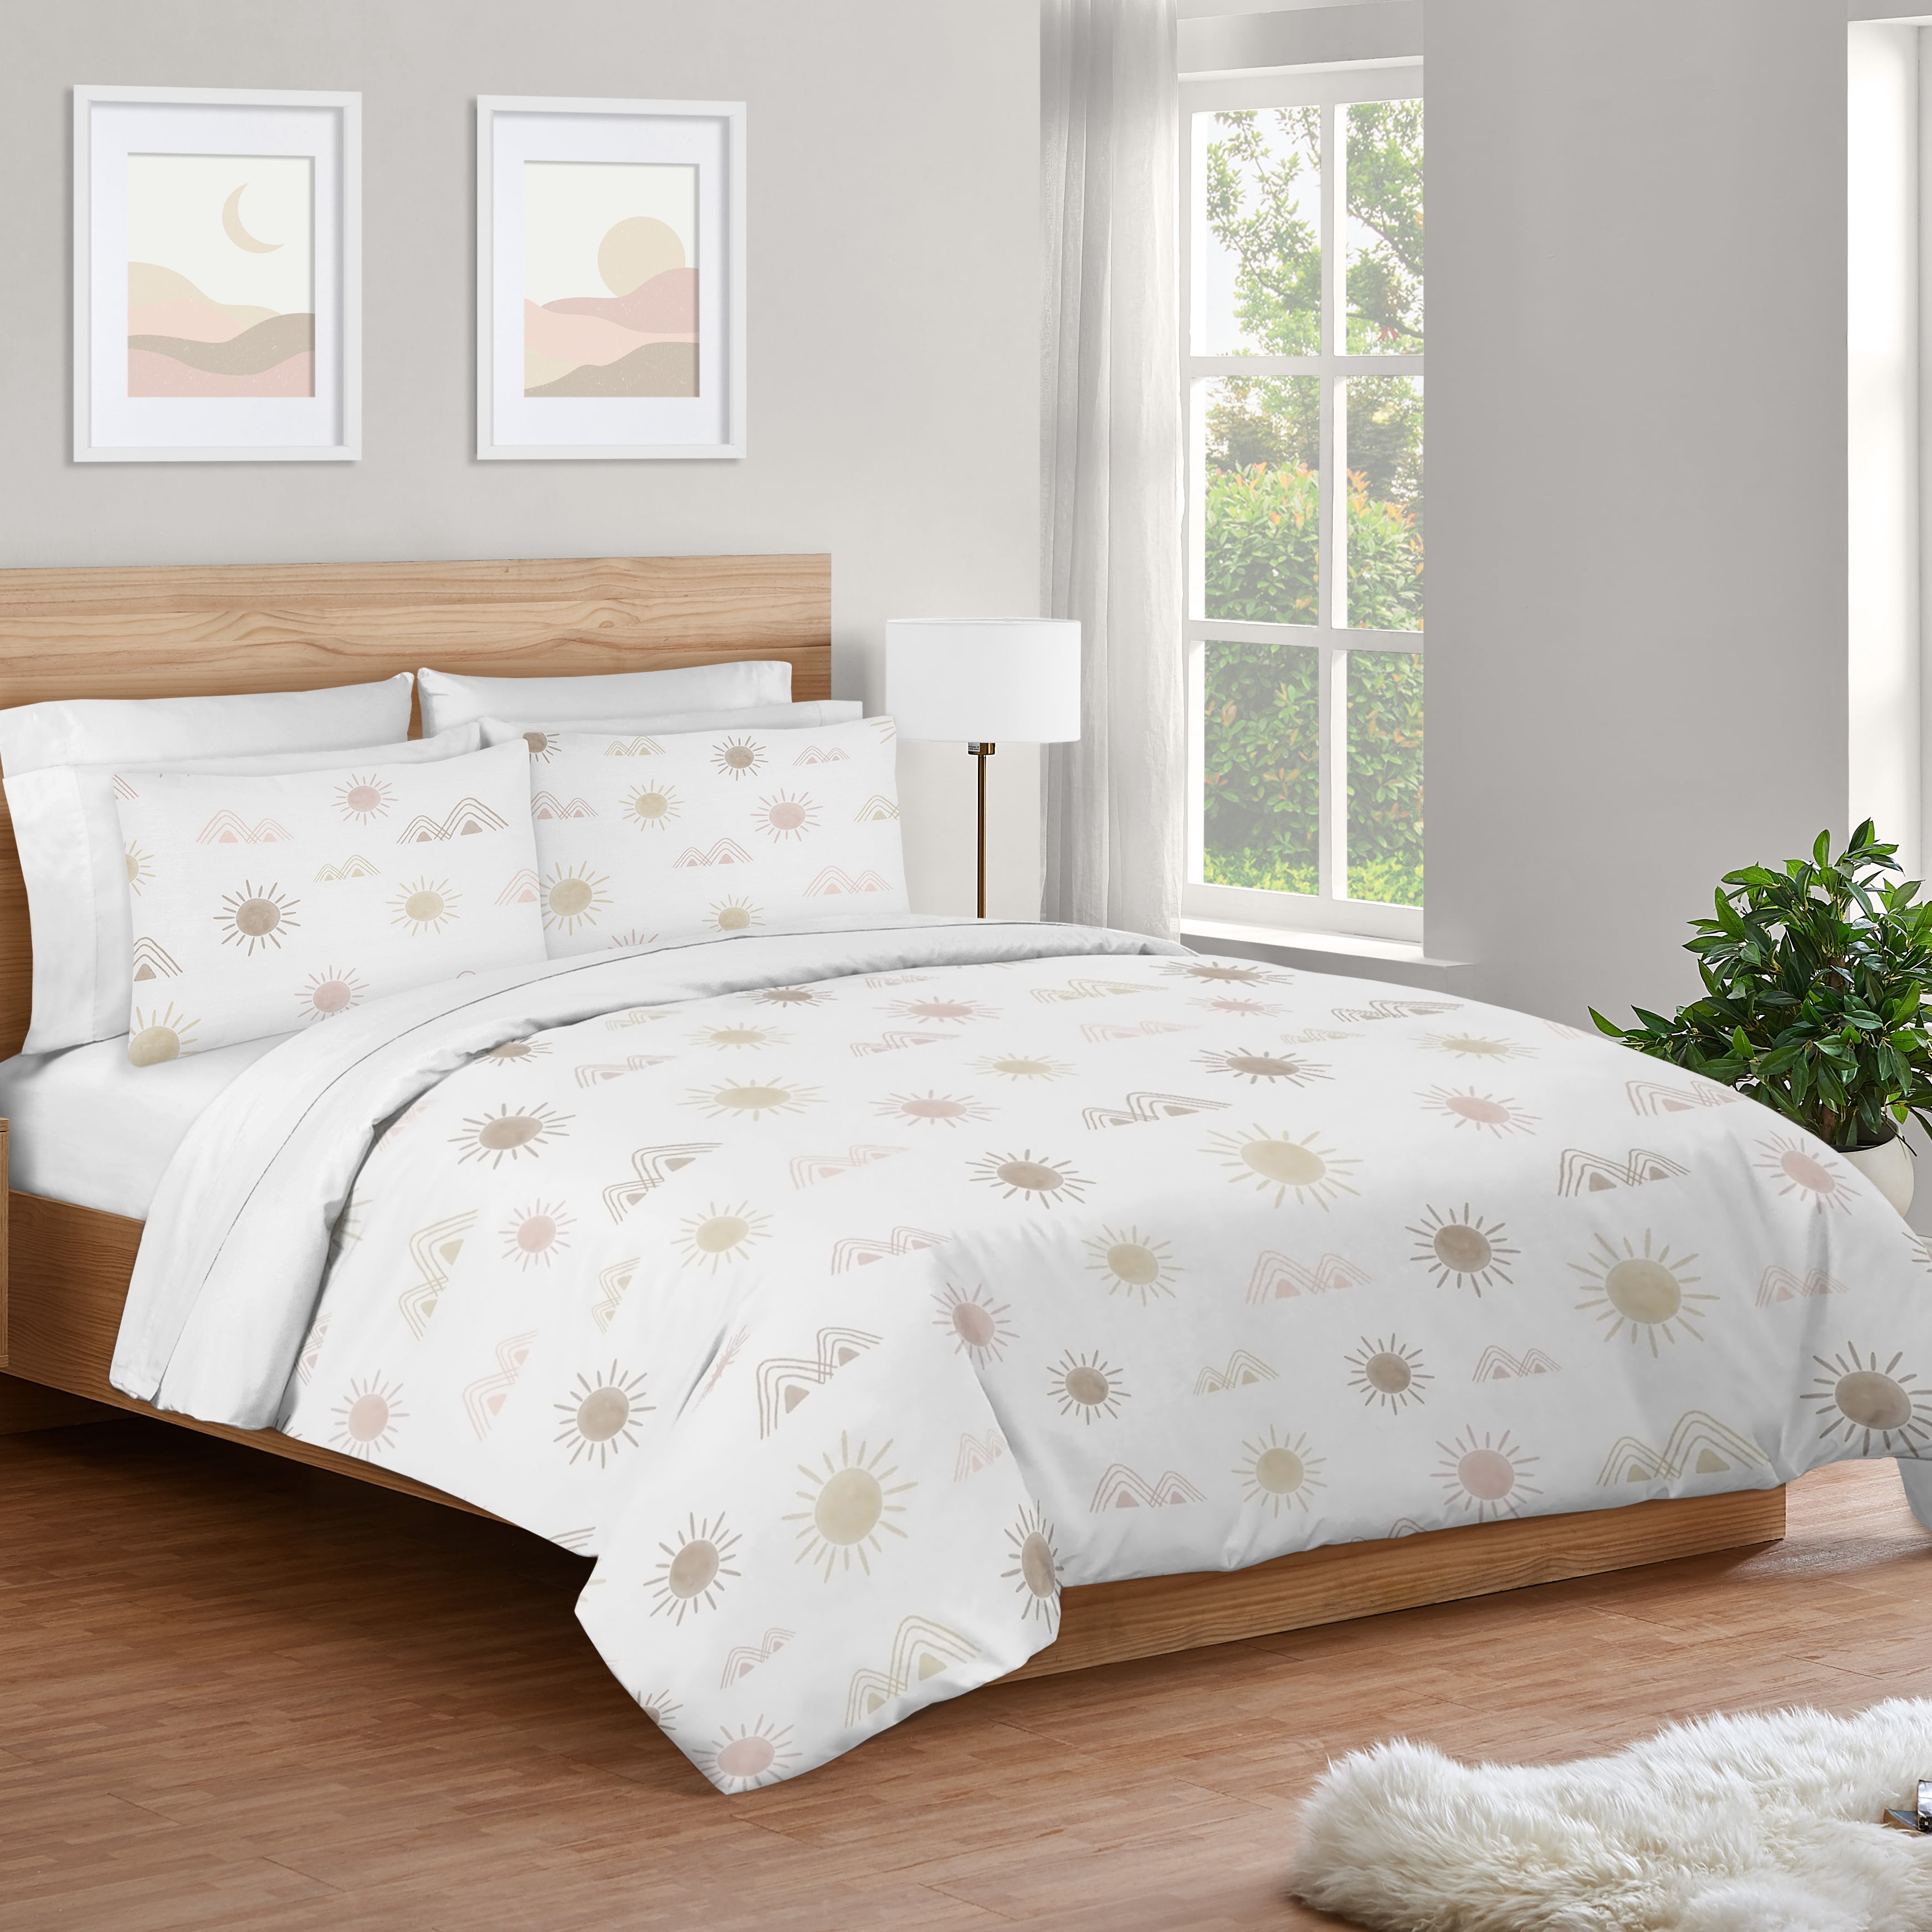 Girl Twin Bedding Comforter Set, White And Gold Twin Bedding